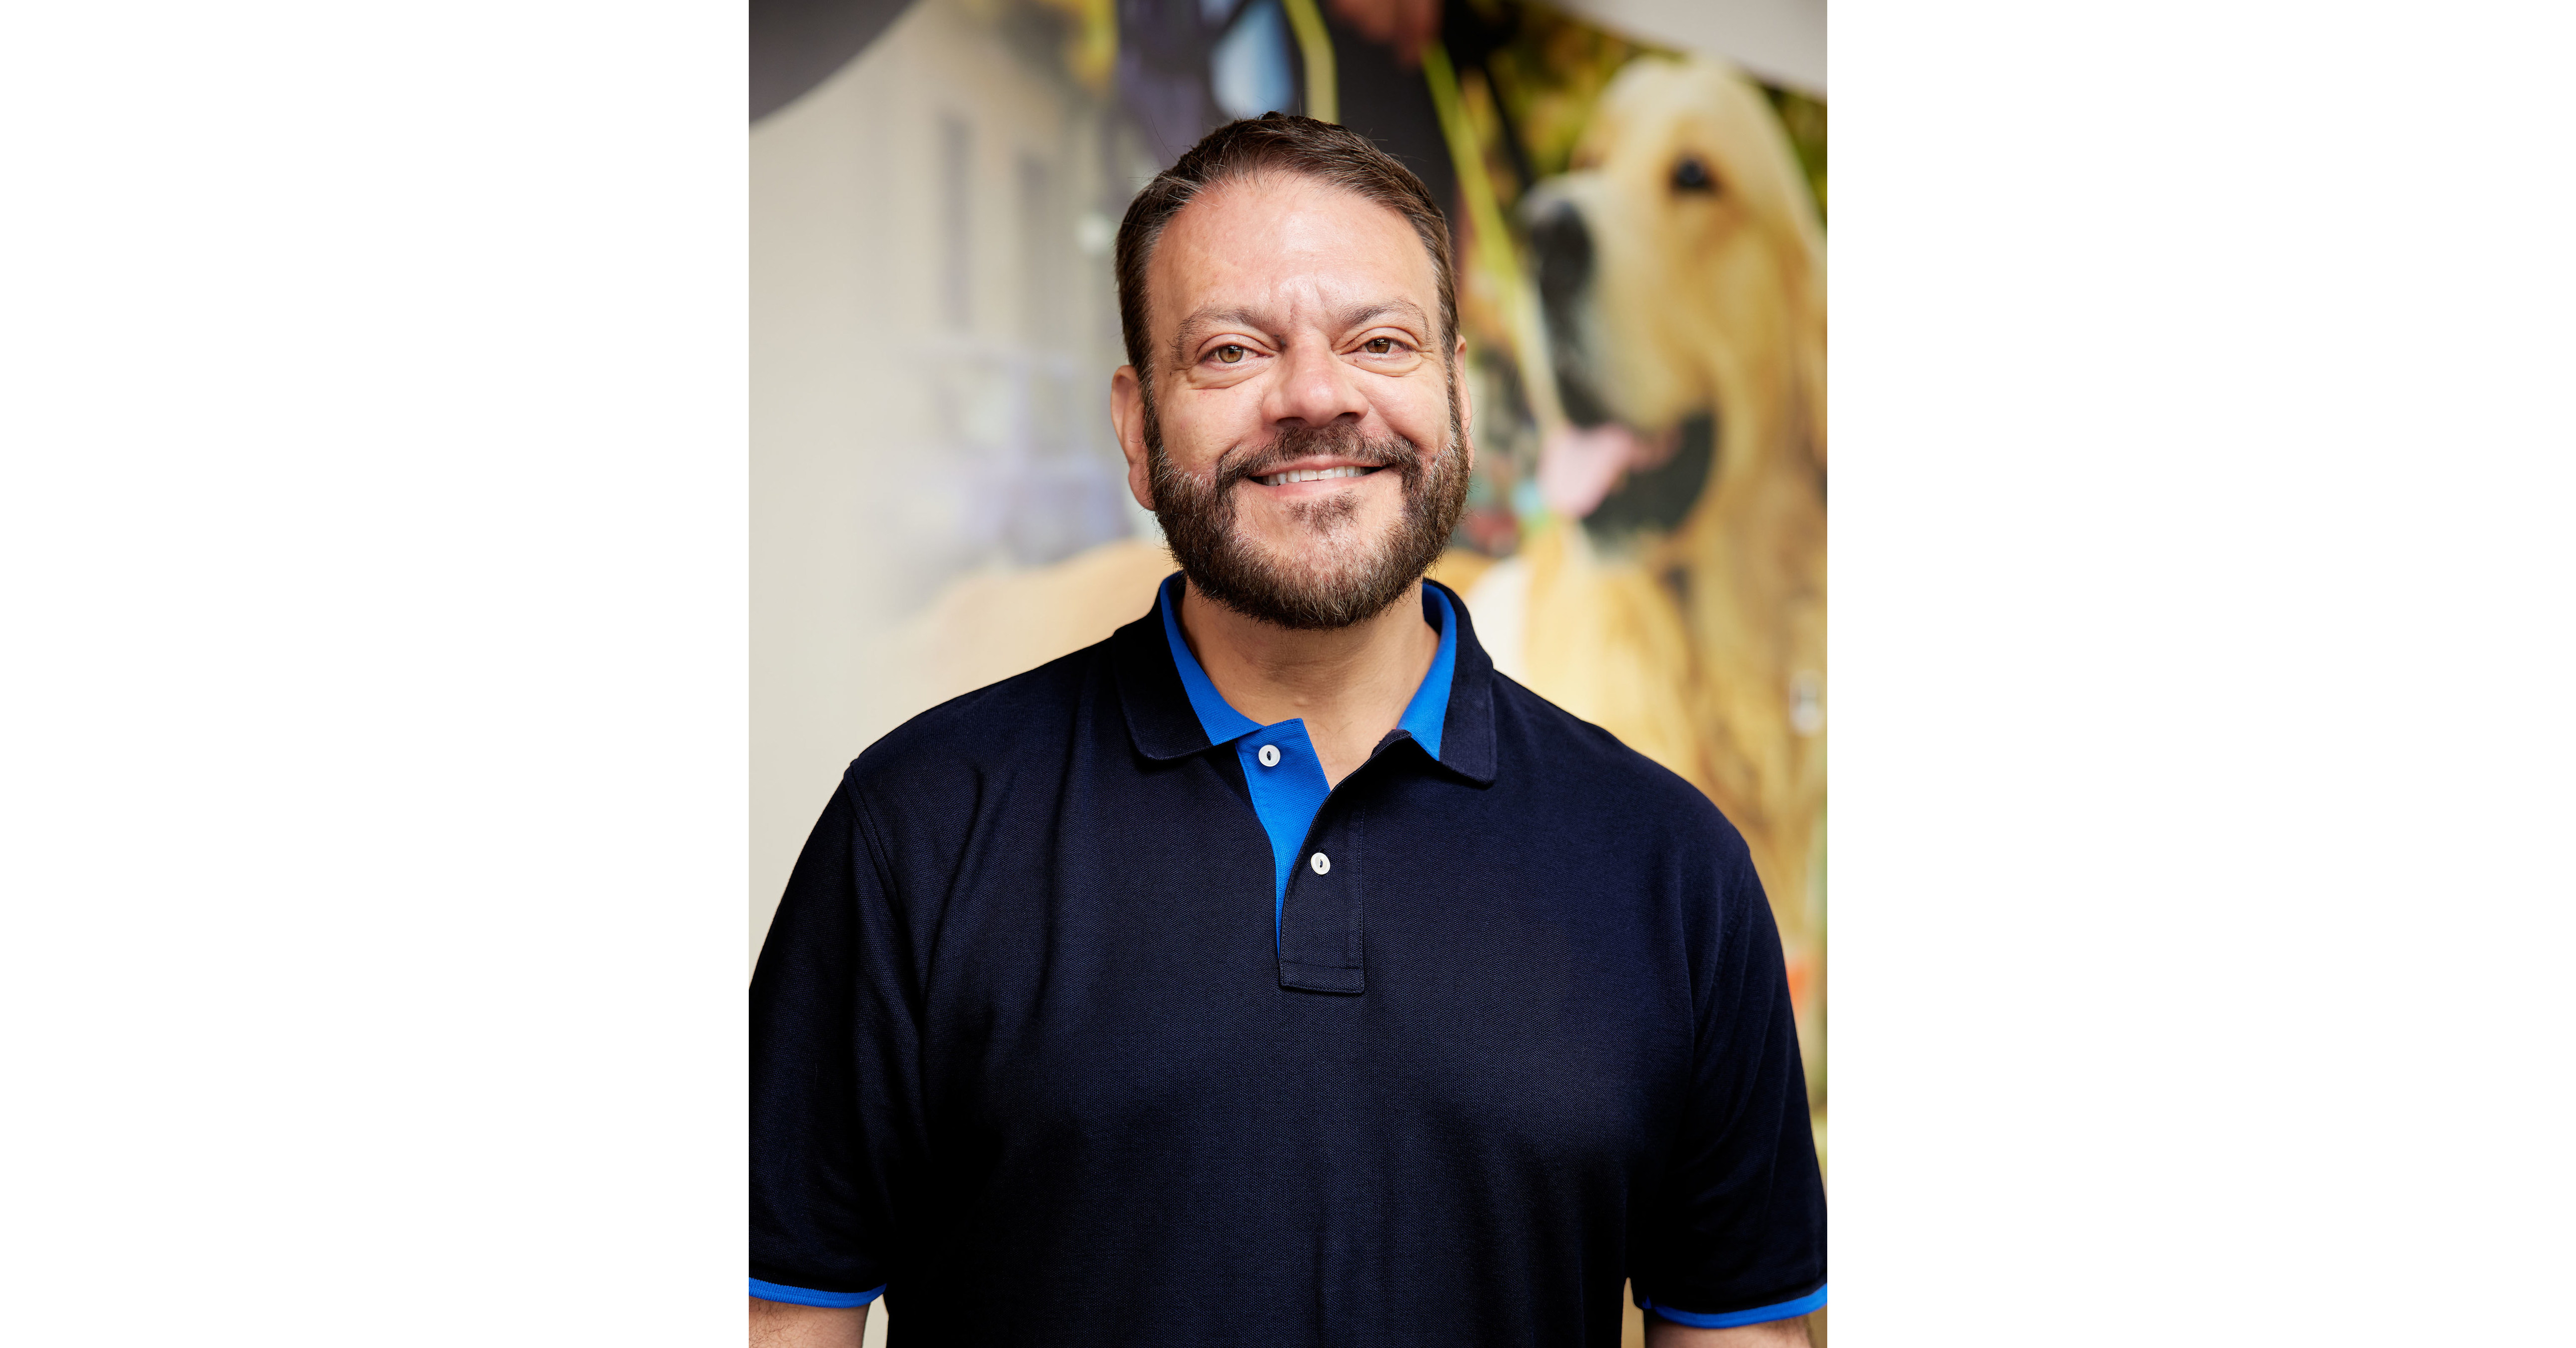 Mars Petcare Appoints new Executive to Pet Nutrition Leadership Team